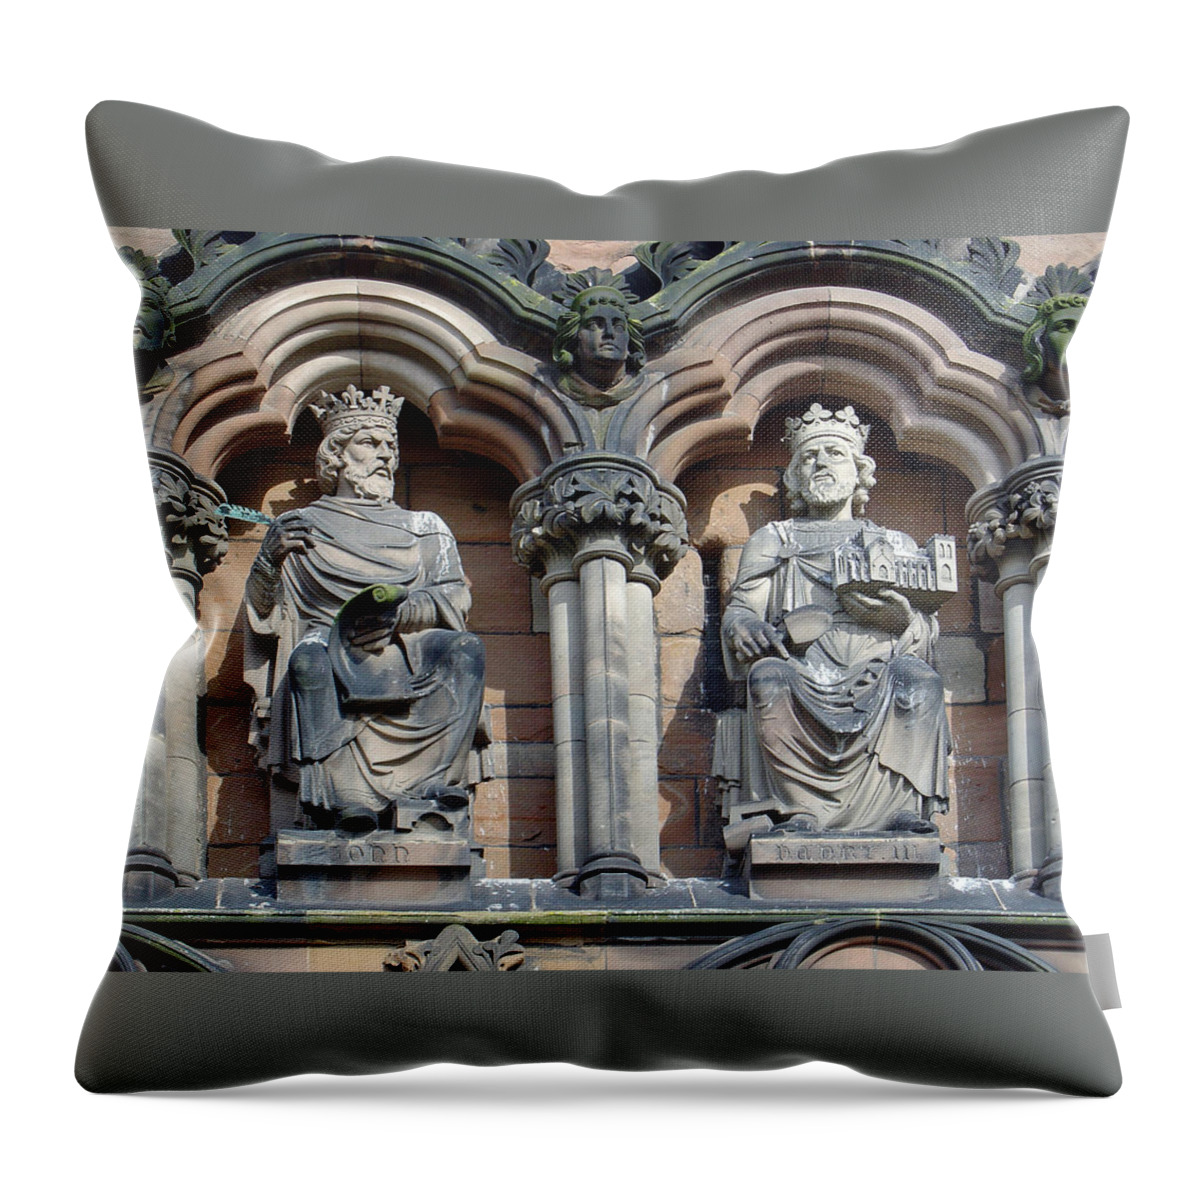 Europe Throw Pillow featuring the photograph Two Kings by Rod Johnson